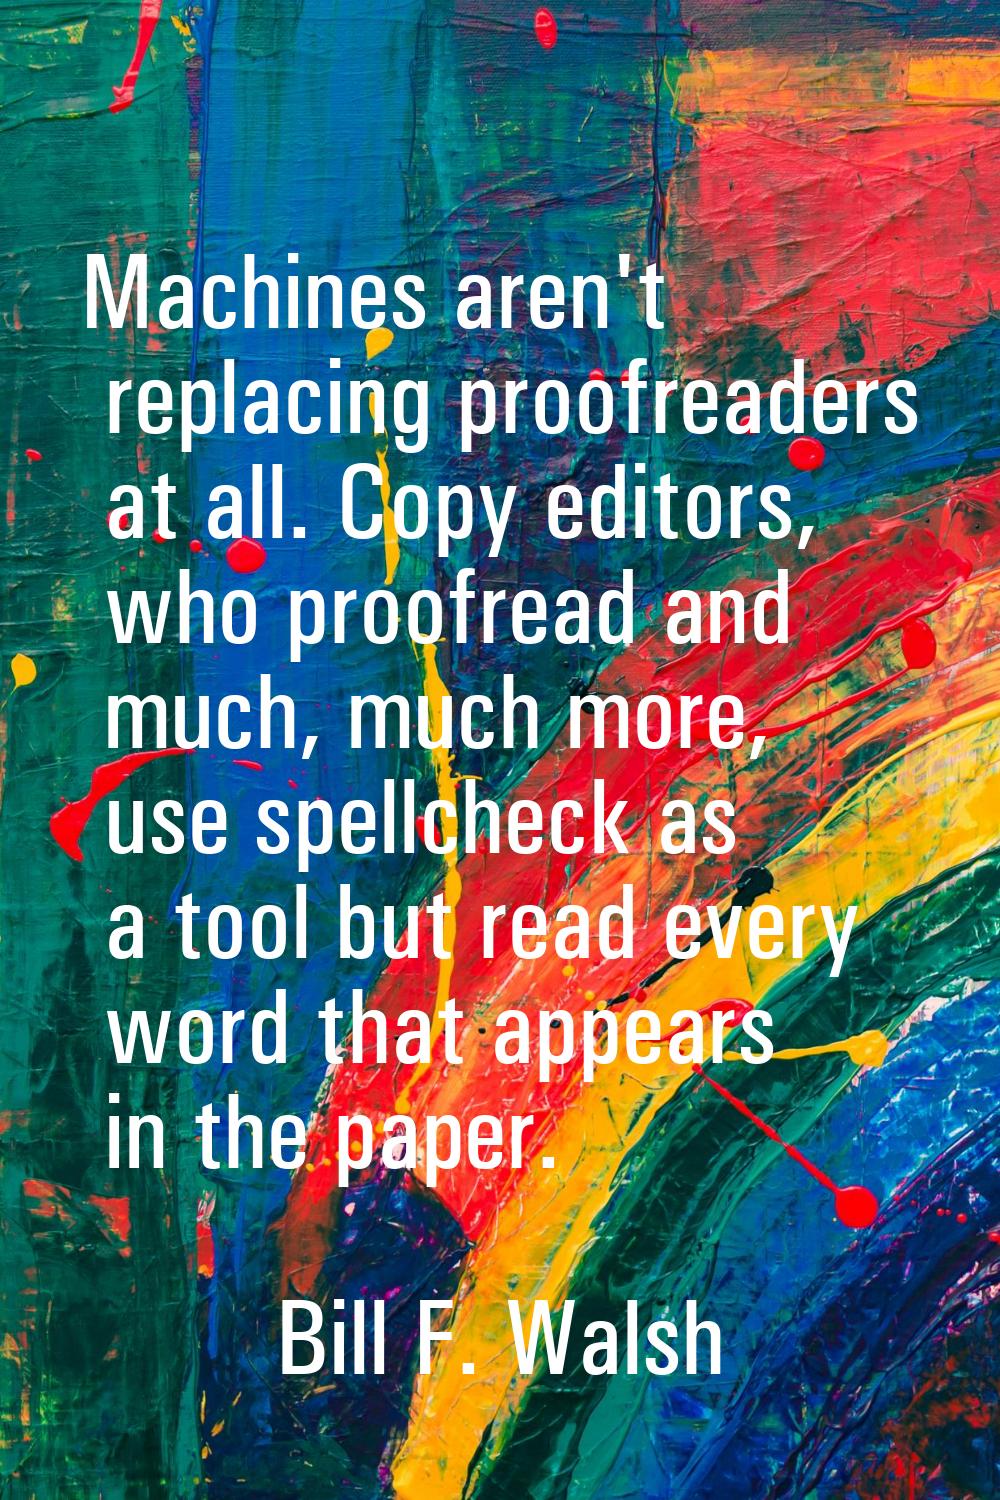 Machines aren't replacing proofreaders at all. Copy editors, who proofread and much, much more, use